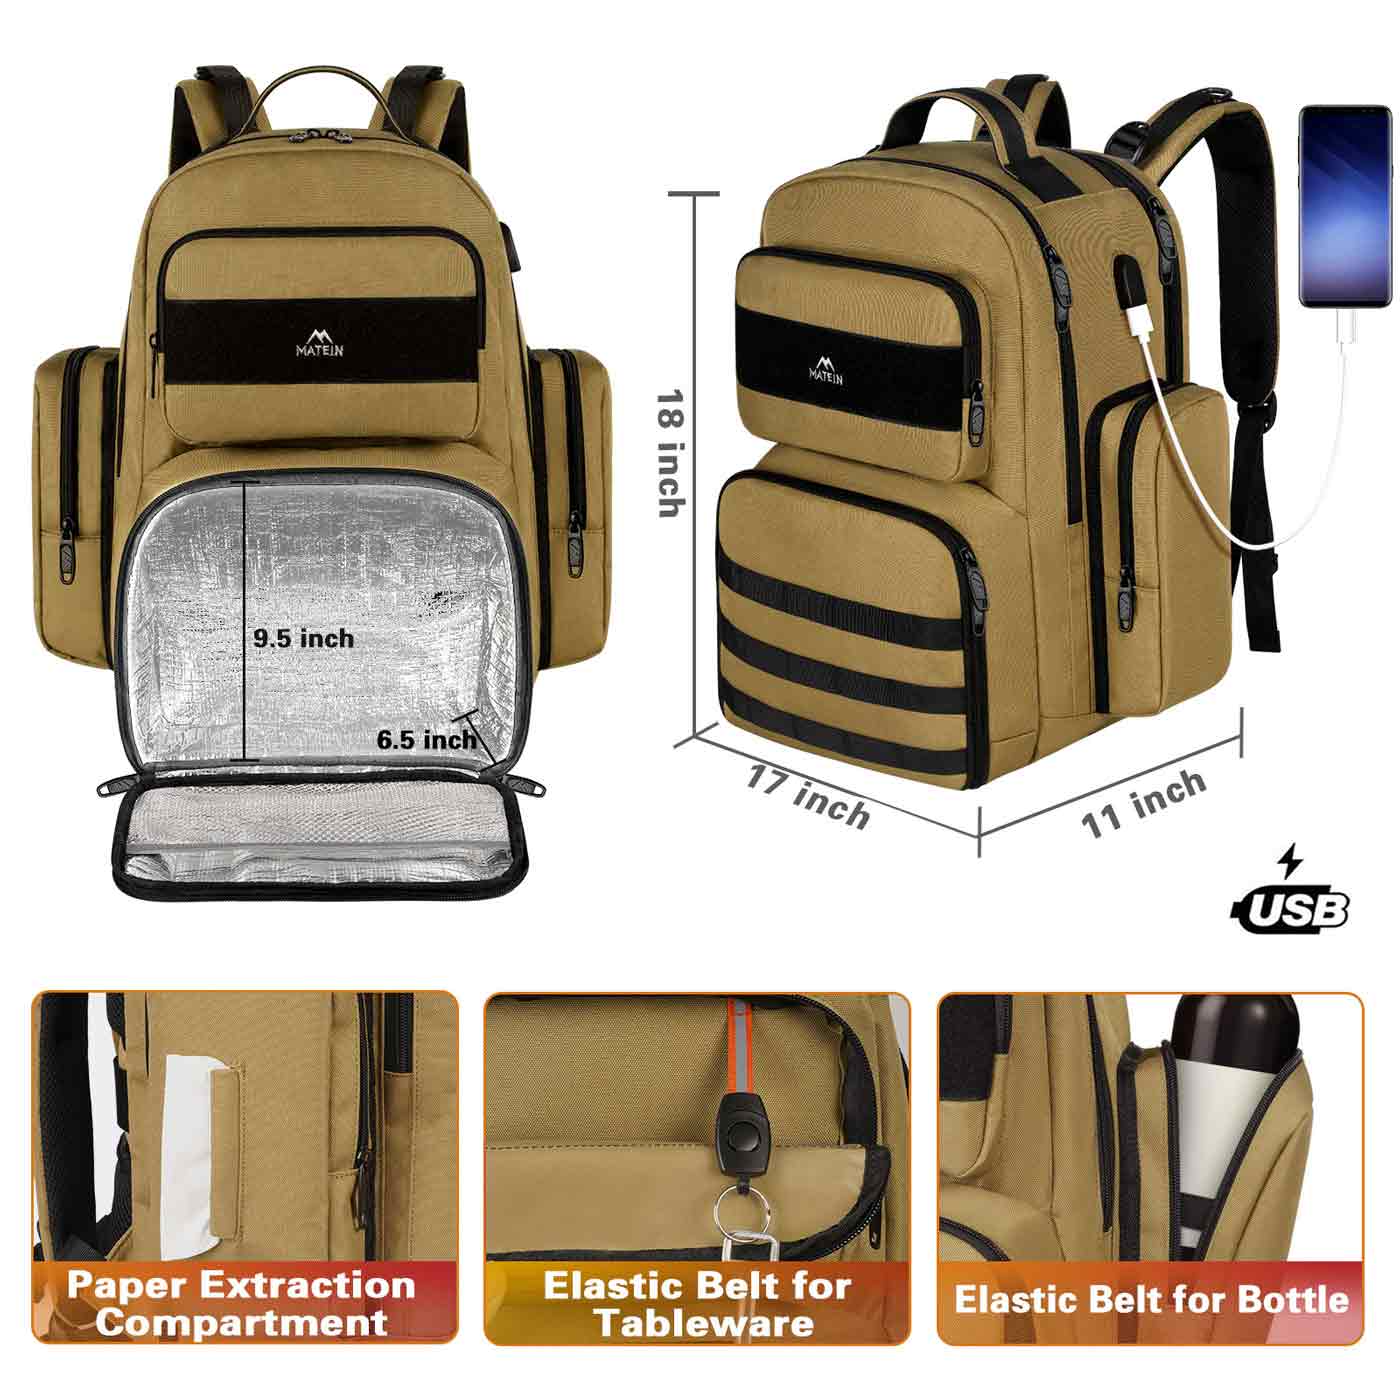 Matein heavy duty backpack with lunch box - lunch backpack